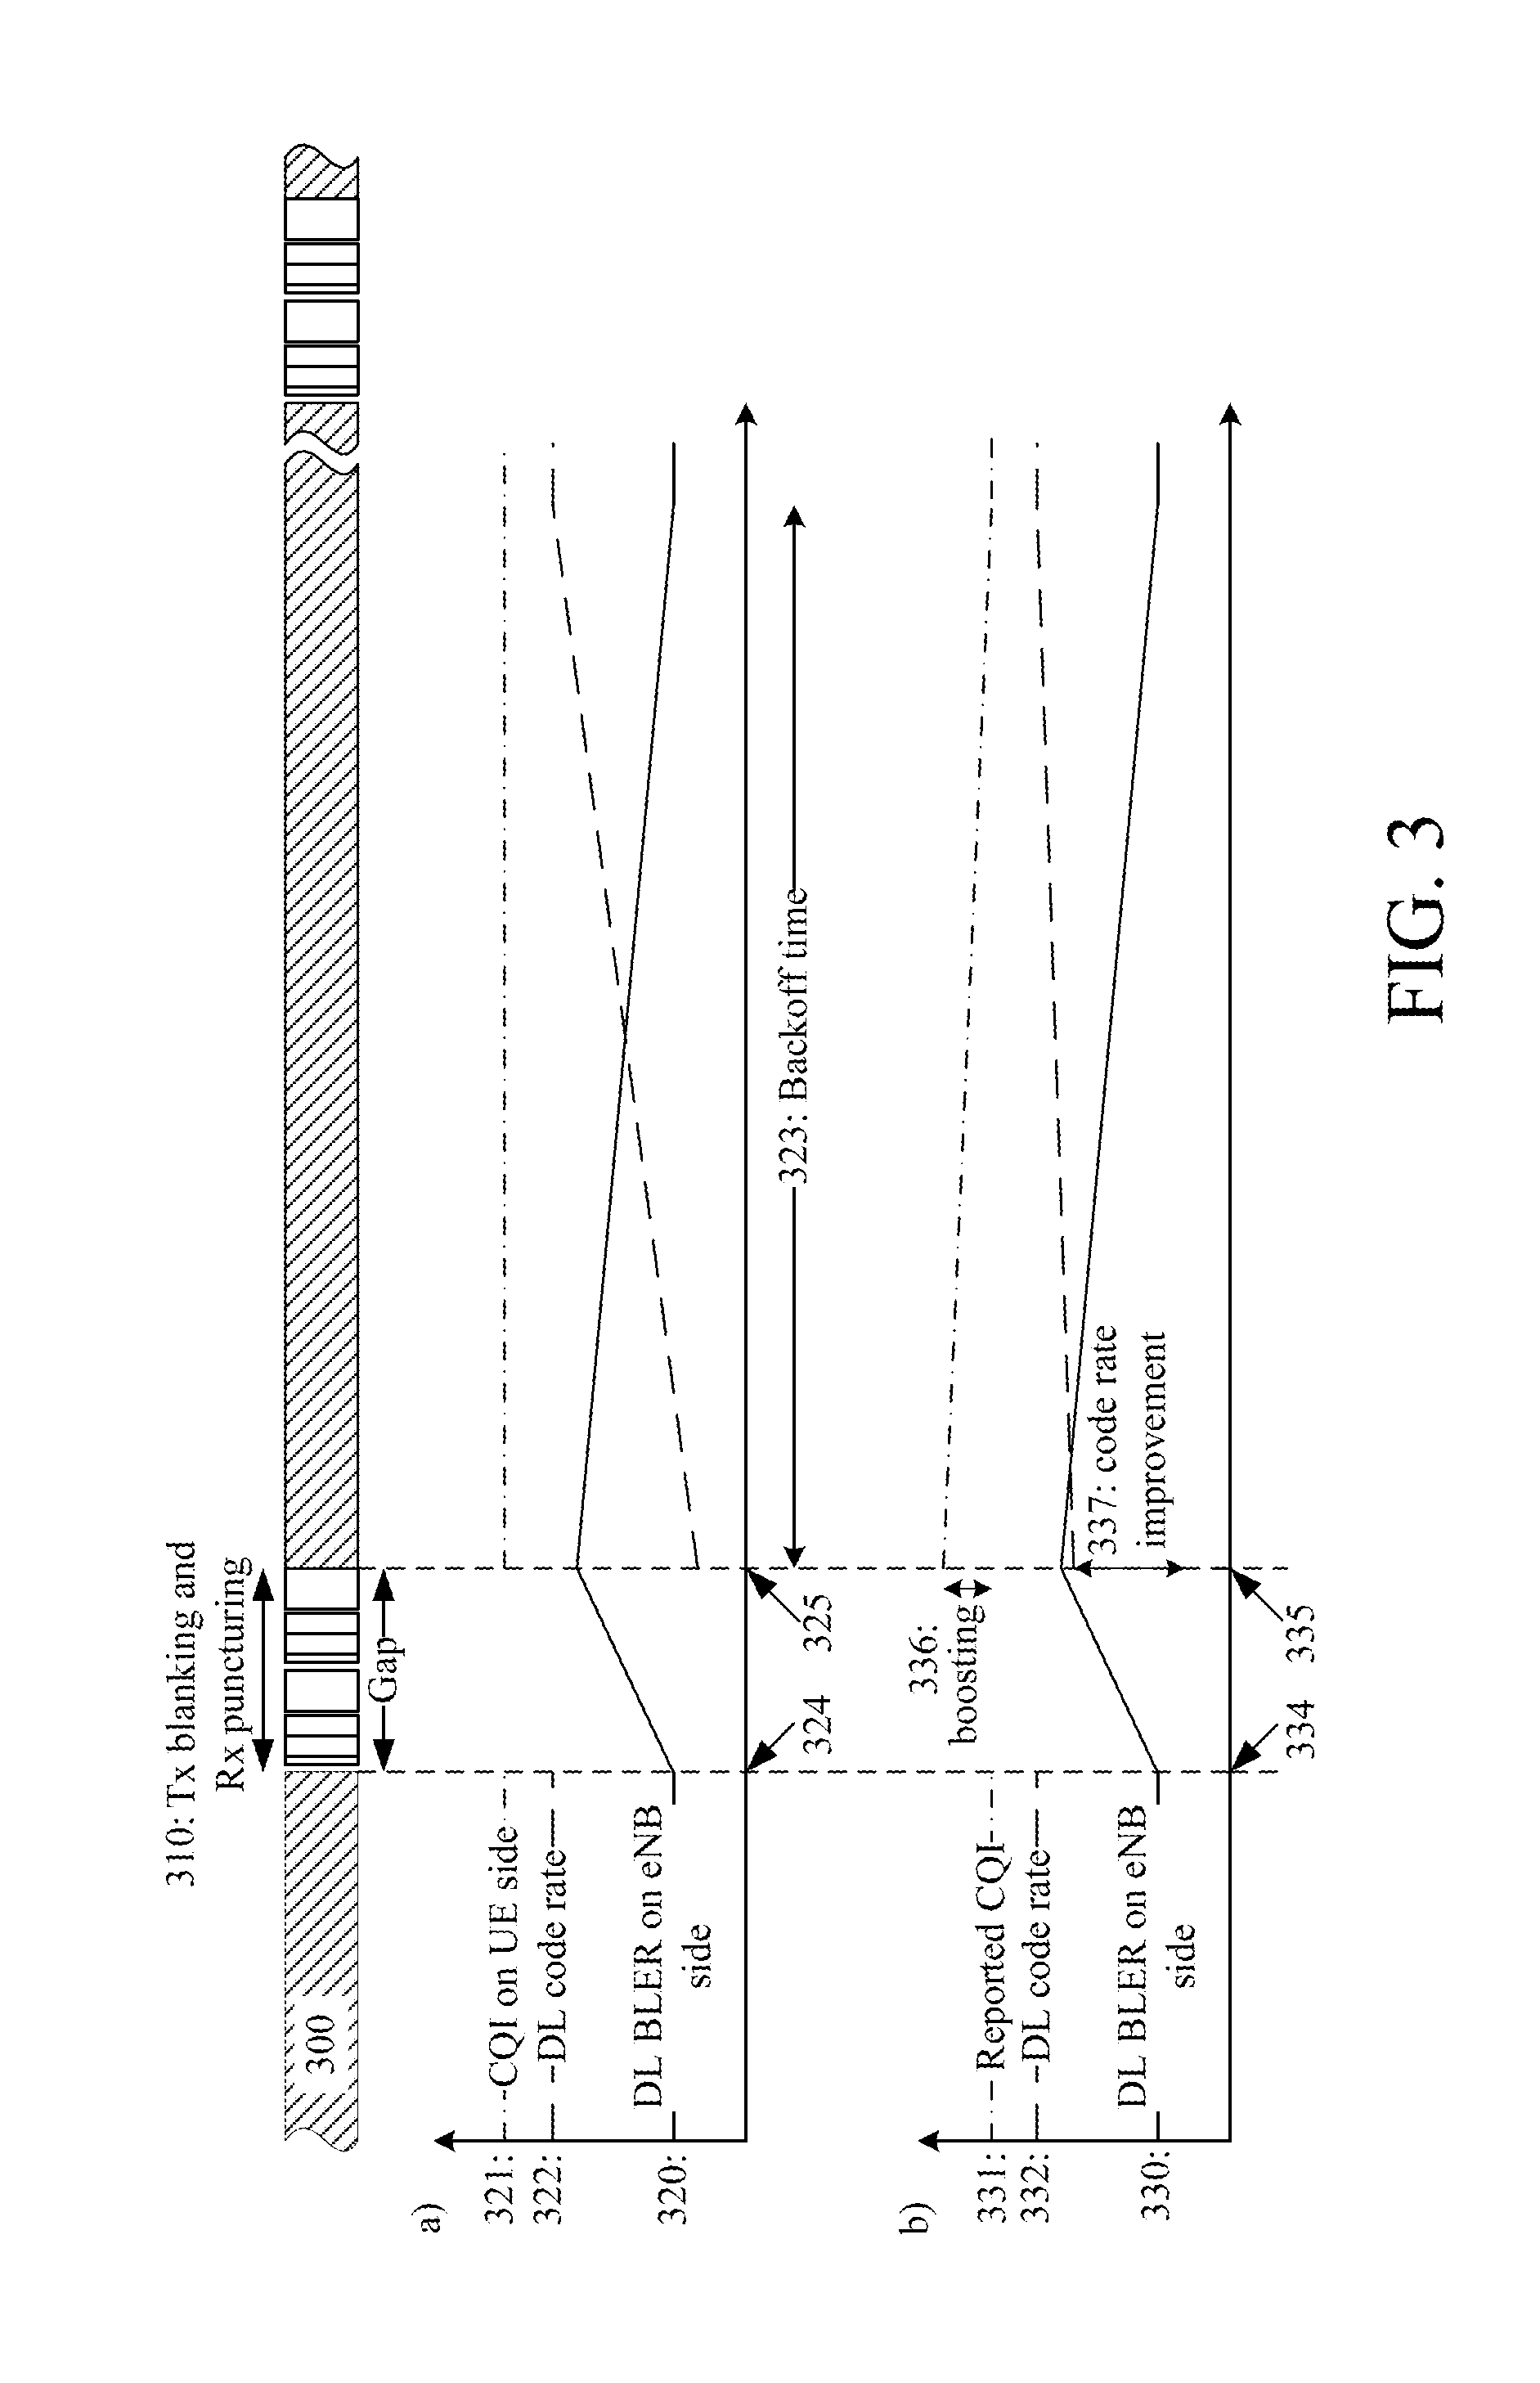 Handling of gaps in use of a radio transceiver